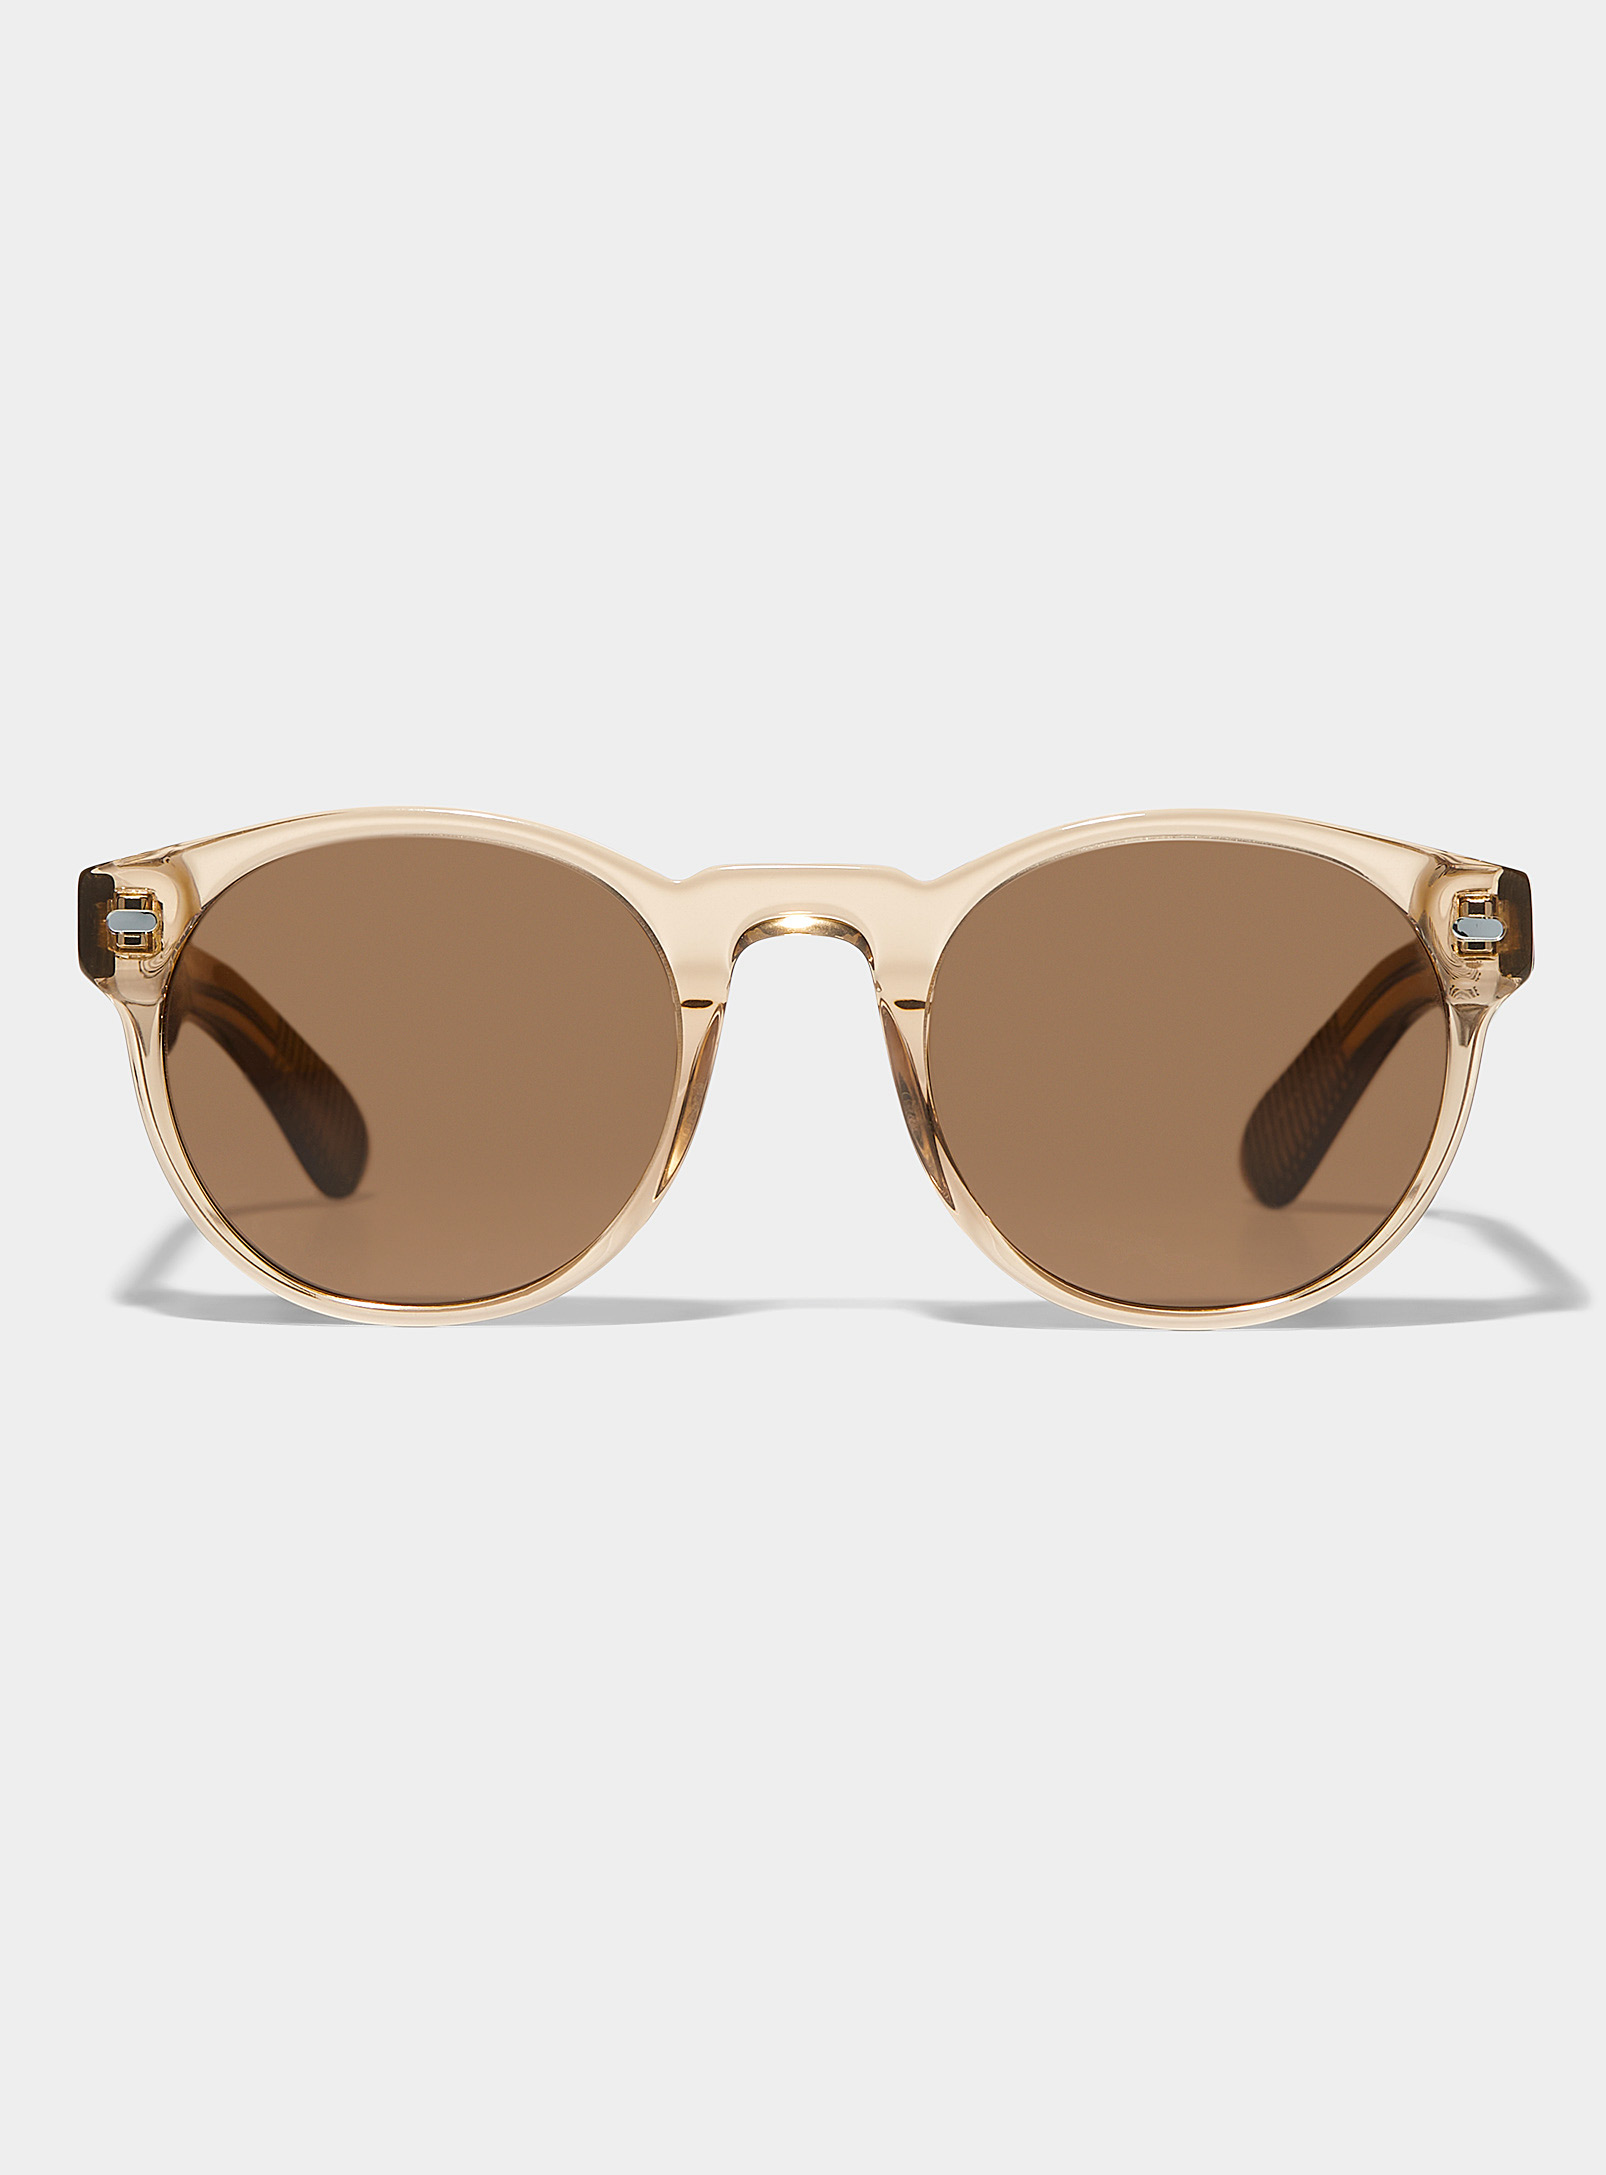 Spitfire Cut Ninety Five Round Sunglasses In Brown